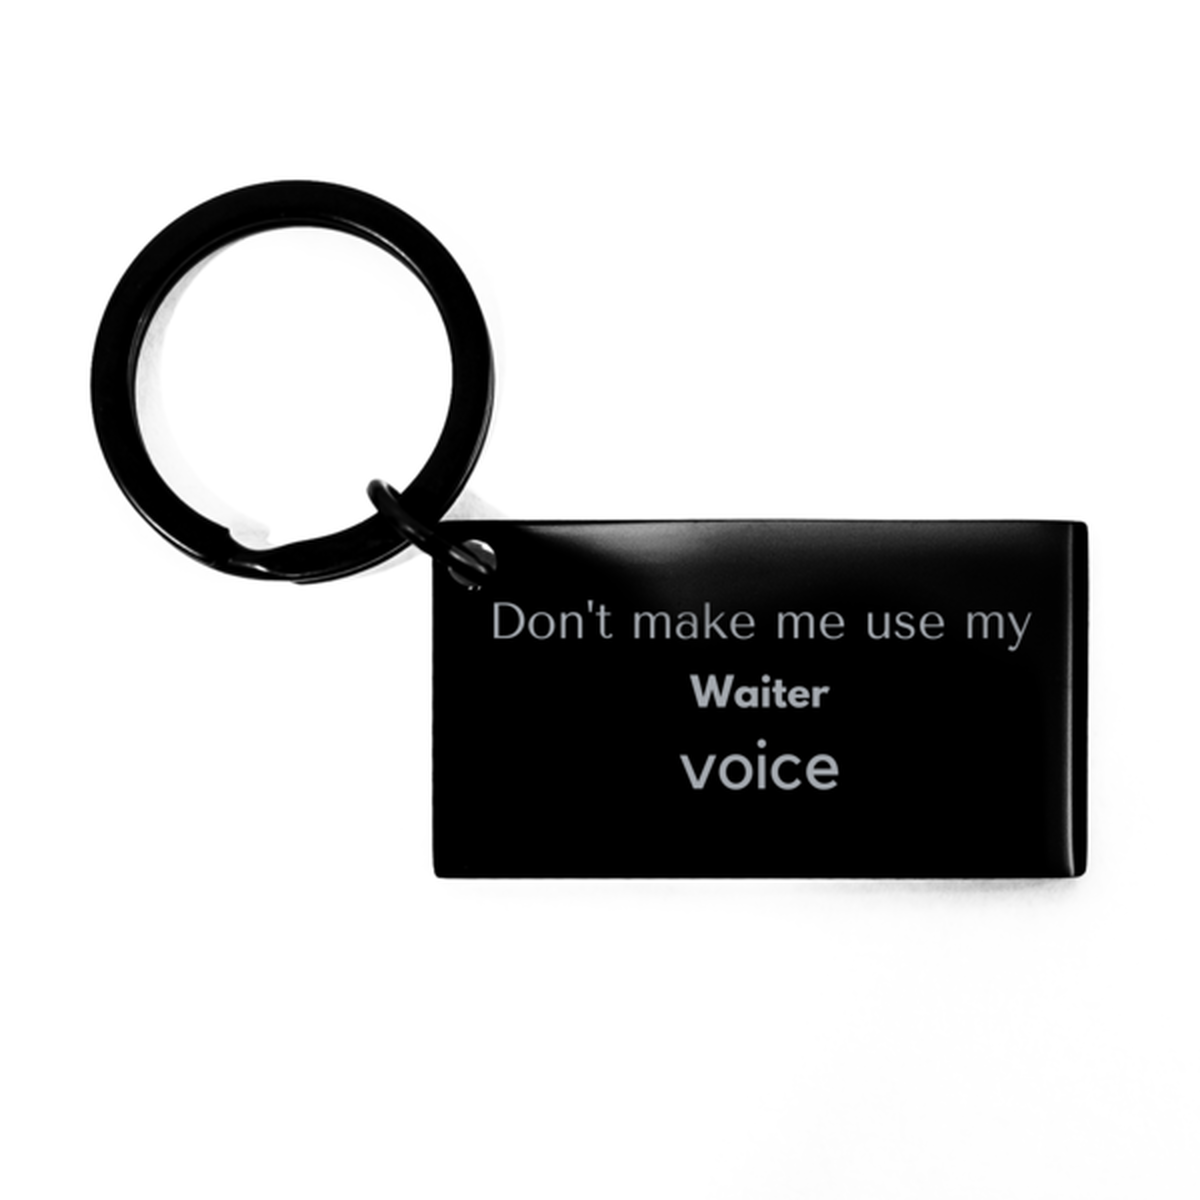 Don't make me use my Waiter voice, Sarcasm Waiter Gifts, Christmas Waiter Keychain Birthday Unique Gifts For Waiter Coworkers, Men, Women, Colleague, Friends